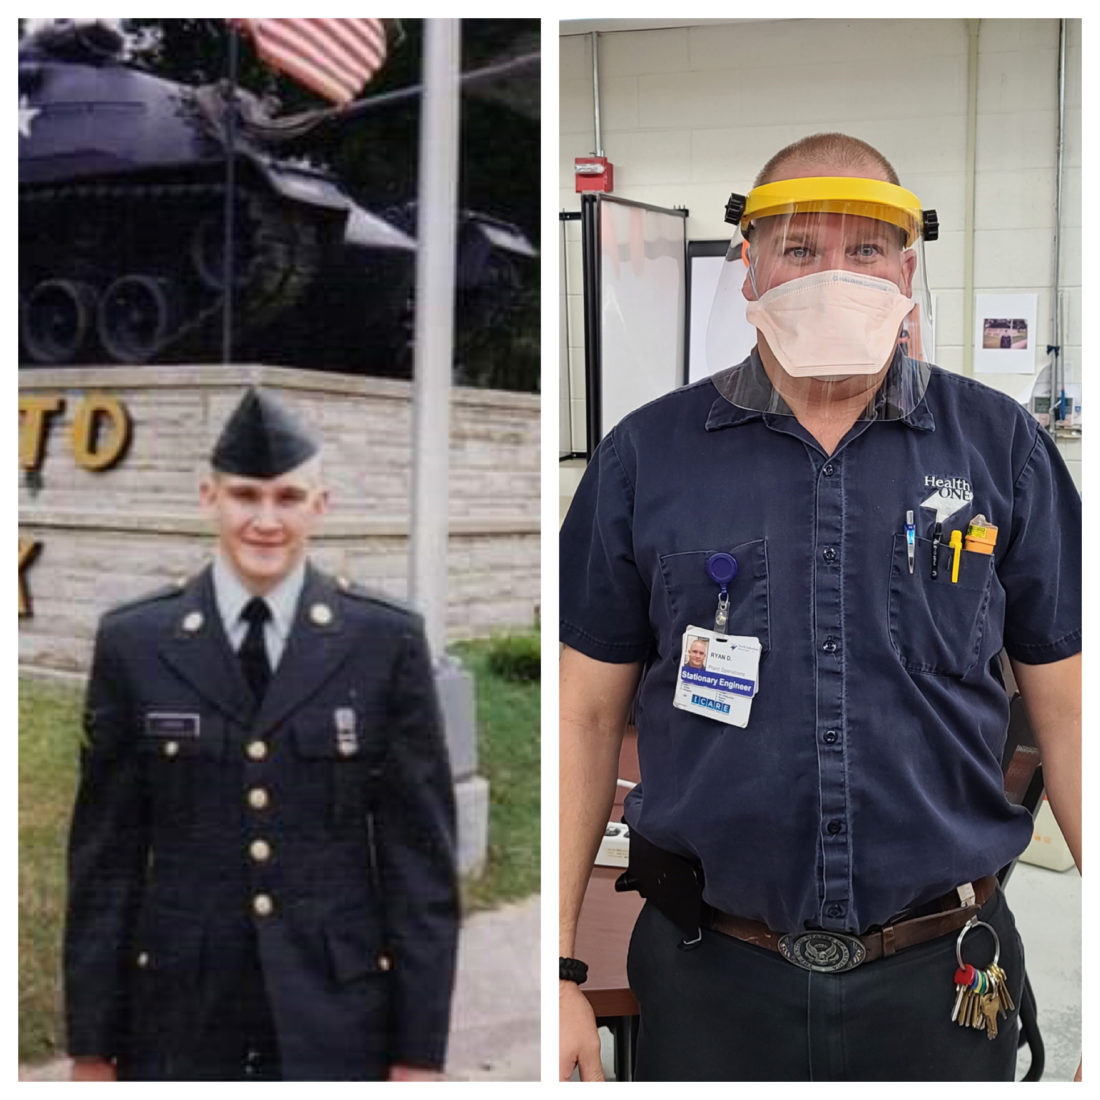 On left, man wearing U.S. Army uniform. On right, same man wearing stationary engineer uniform, face mask and face shield.